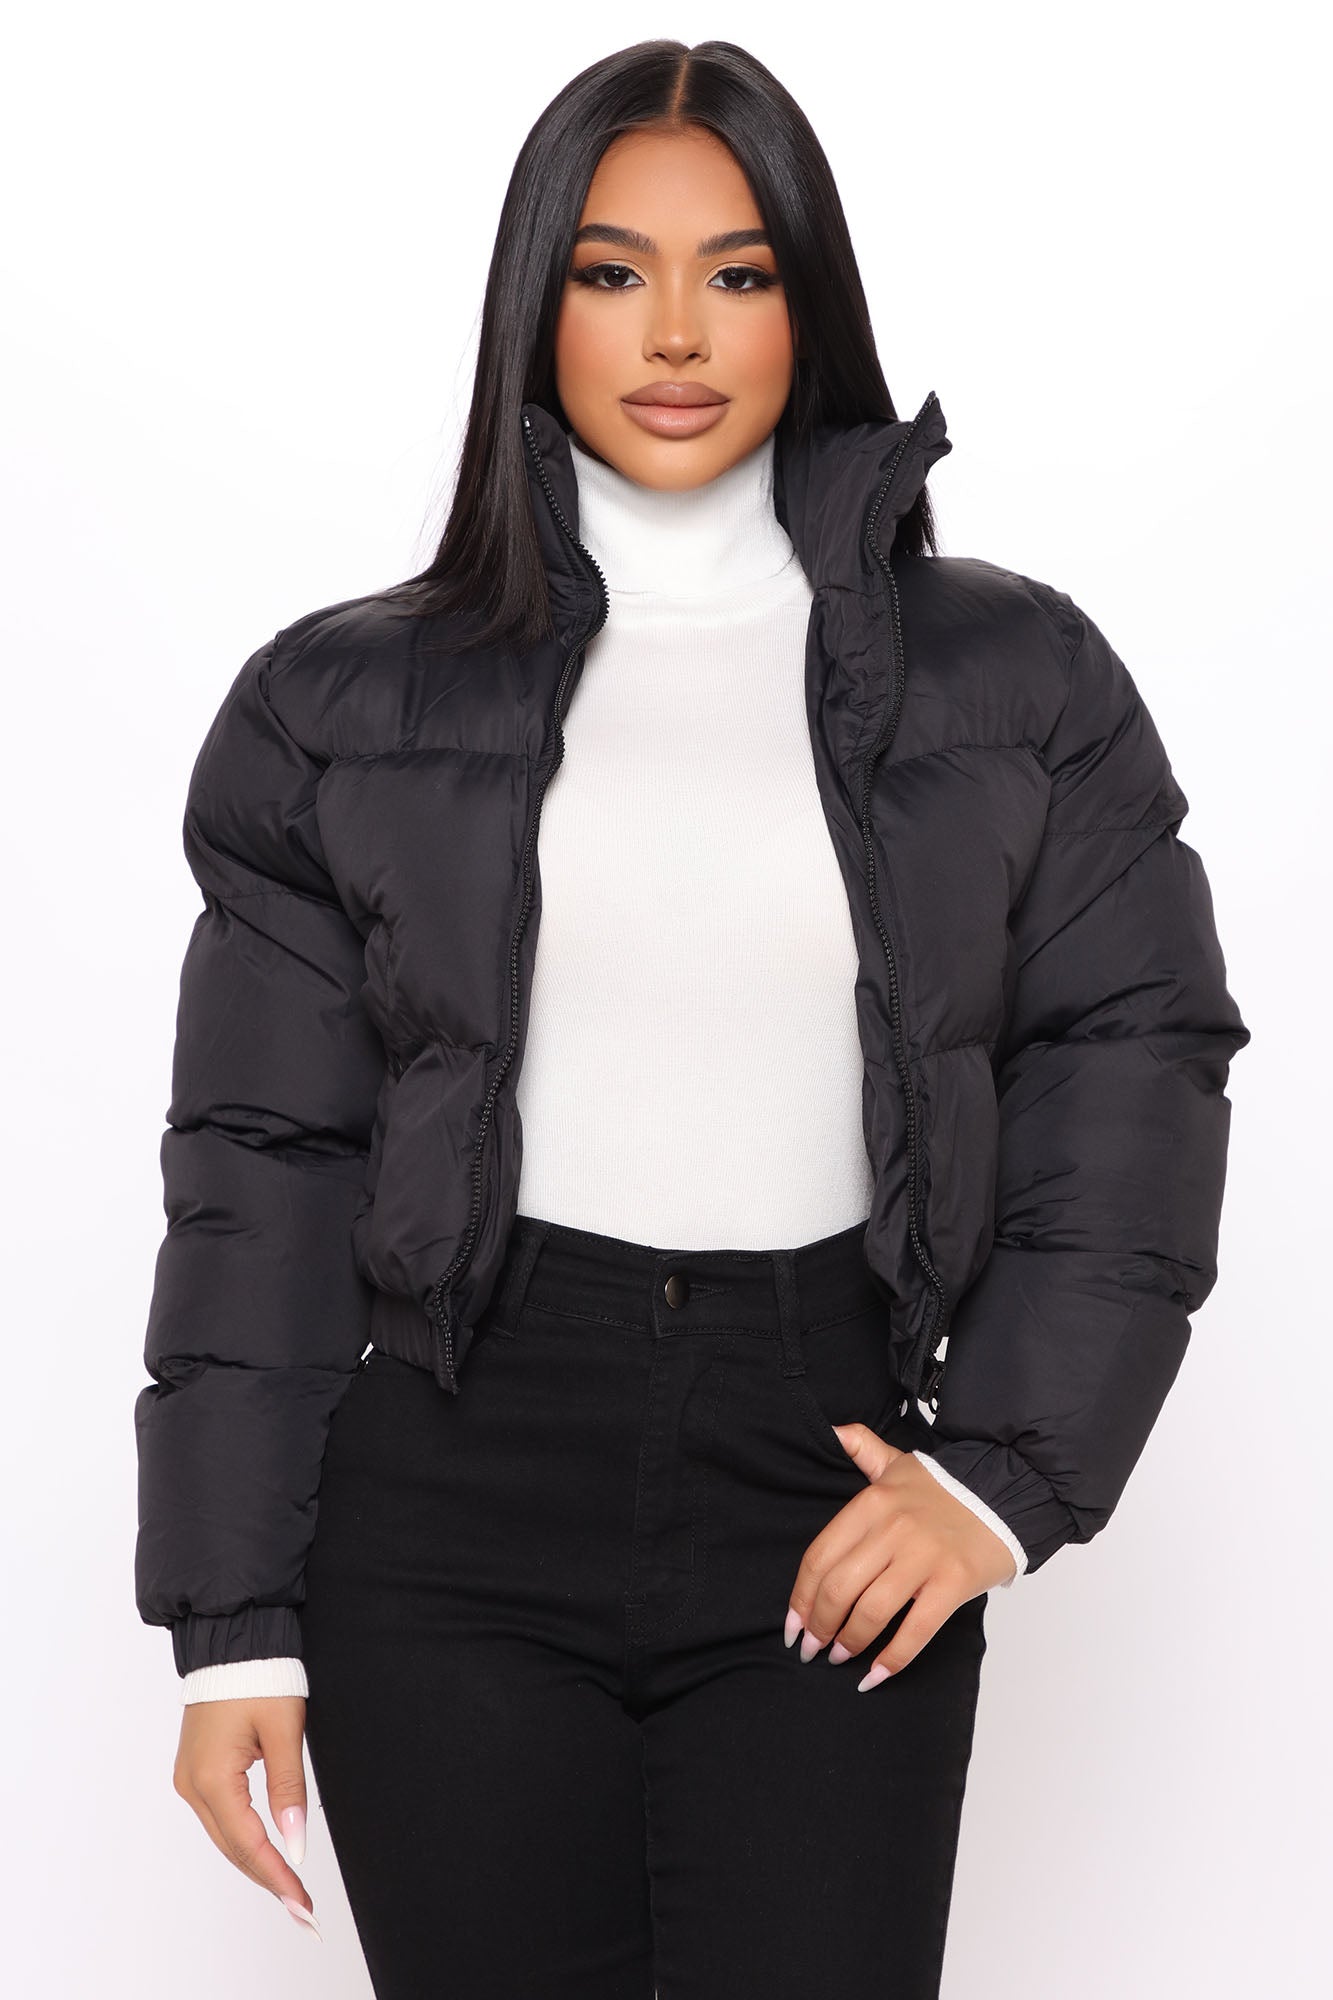 Womens Cropped Puffer Jacket  Cropped puffer jacket, Puffer jacket outfit, Black  puffer jacket